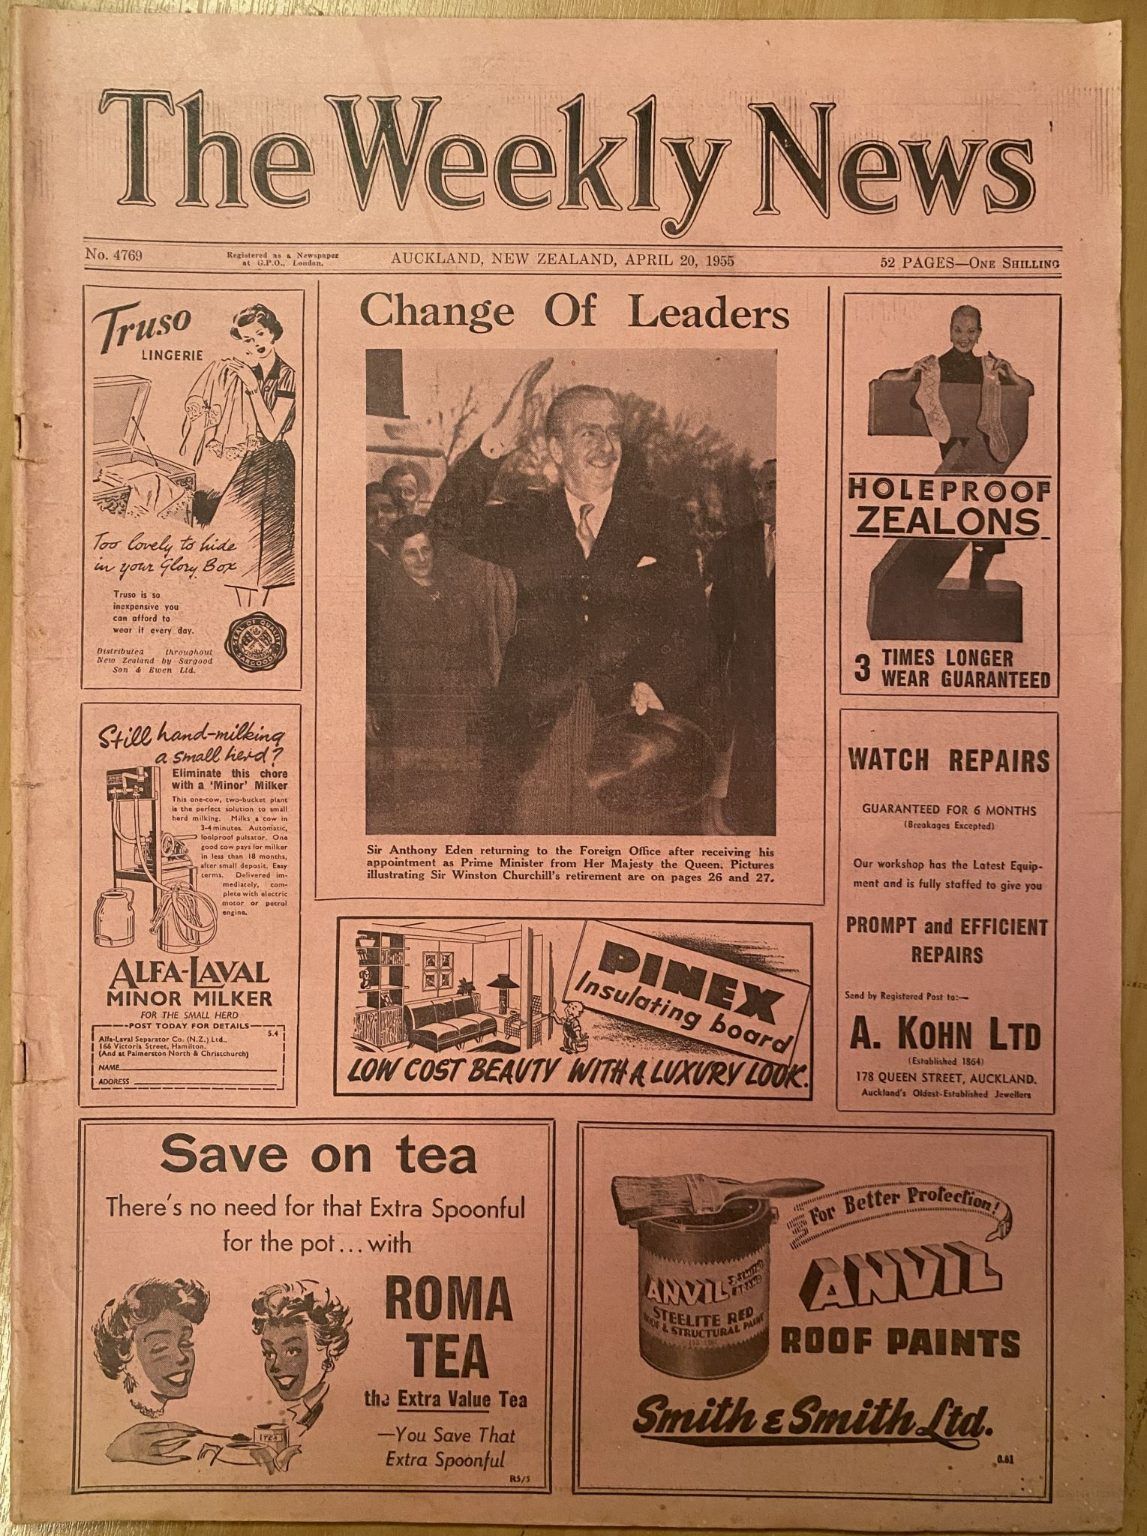 OLD NEWSPAPER: The Weekly News - No. 4769, 20 April 1955